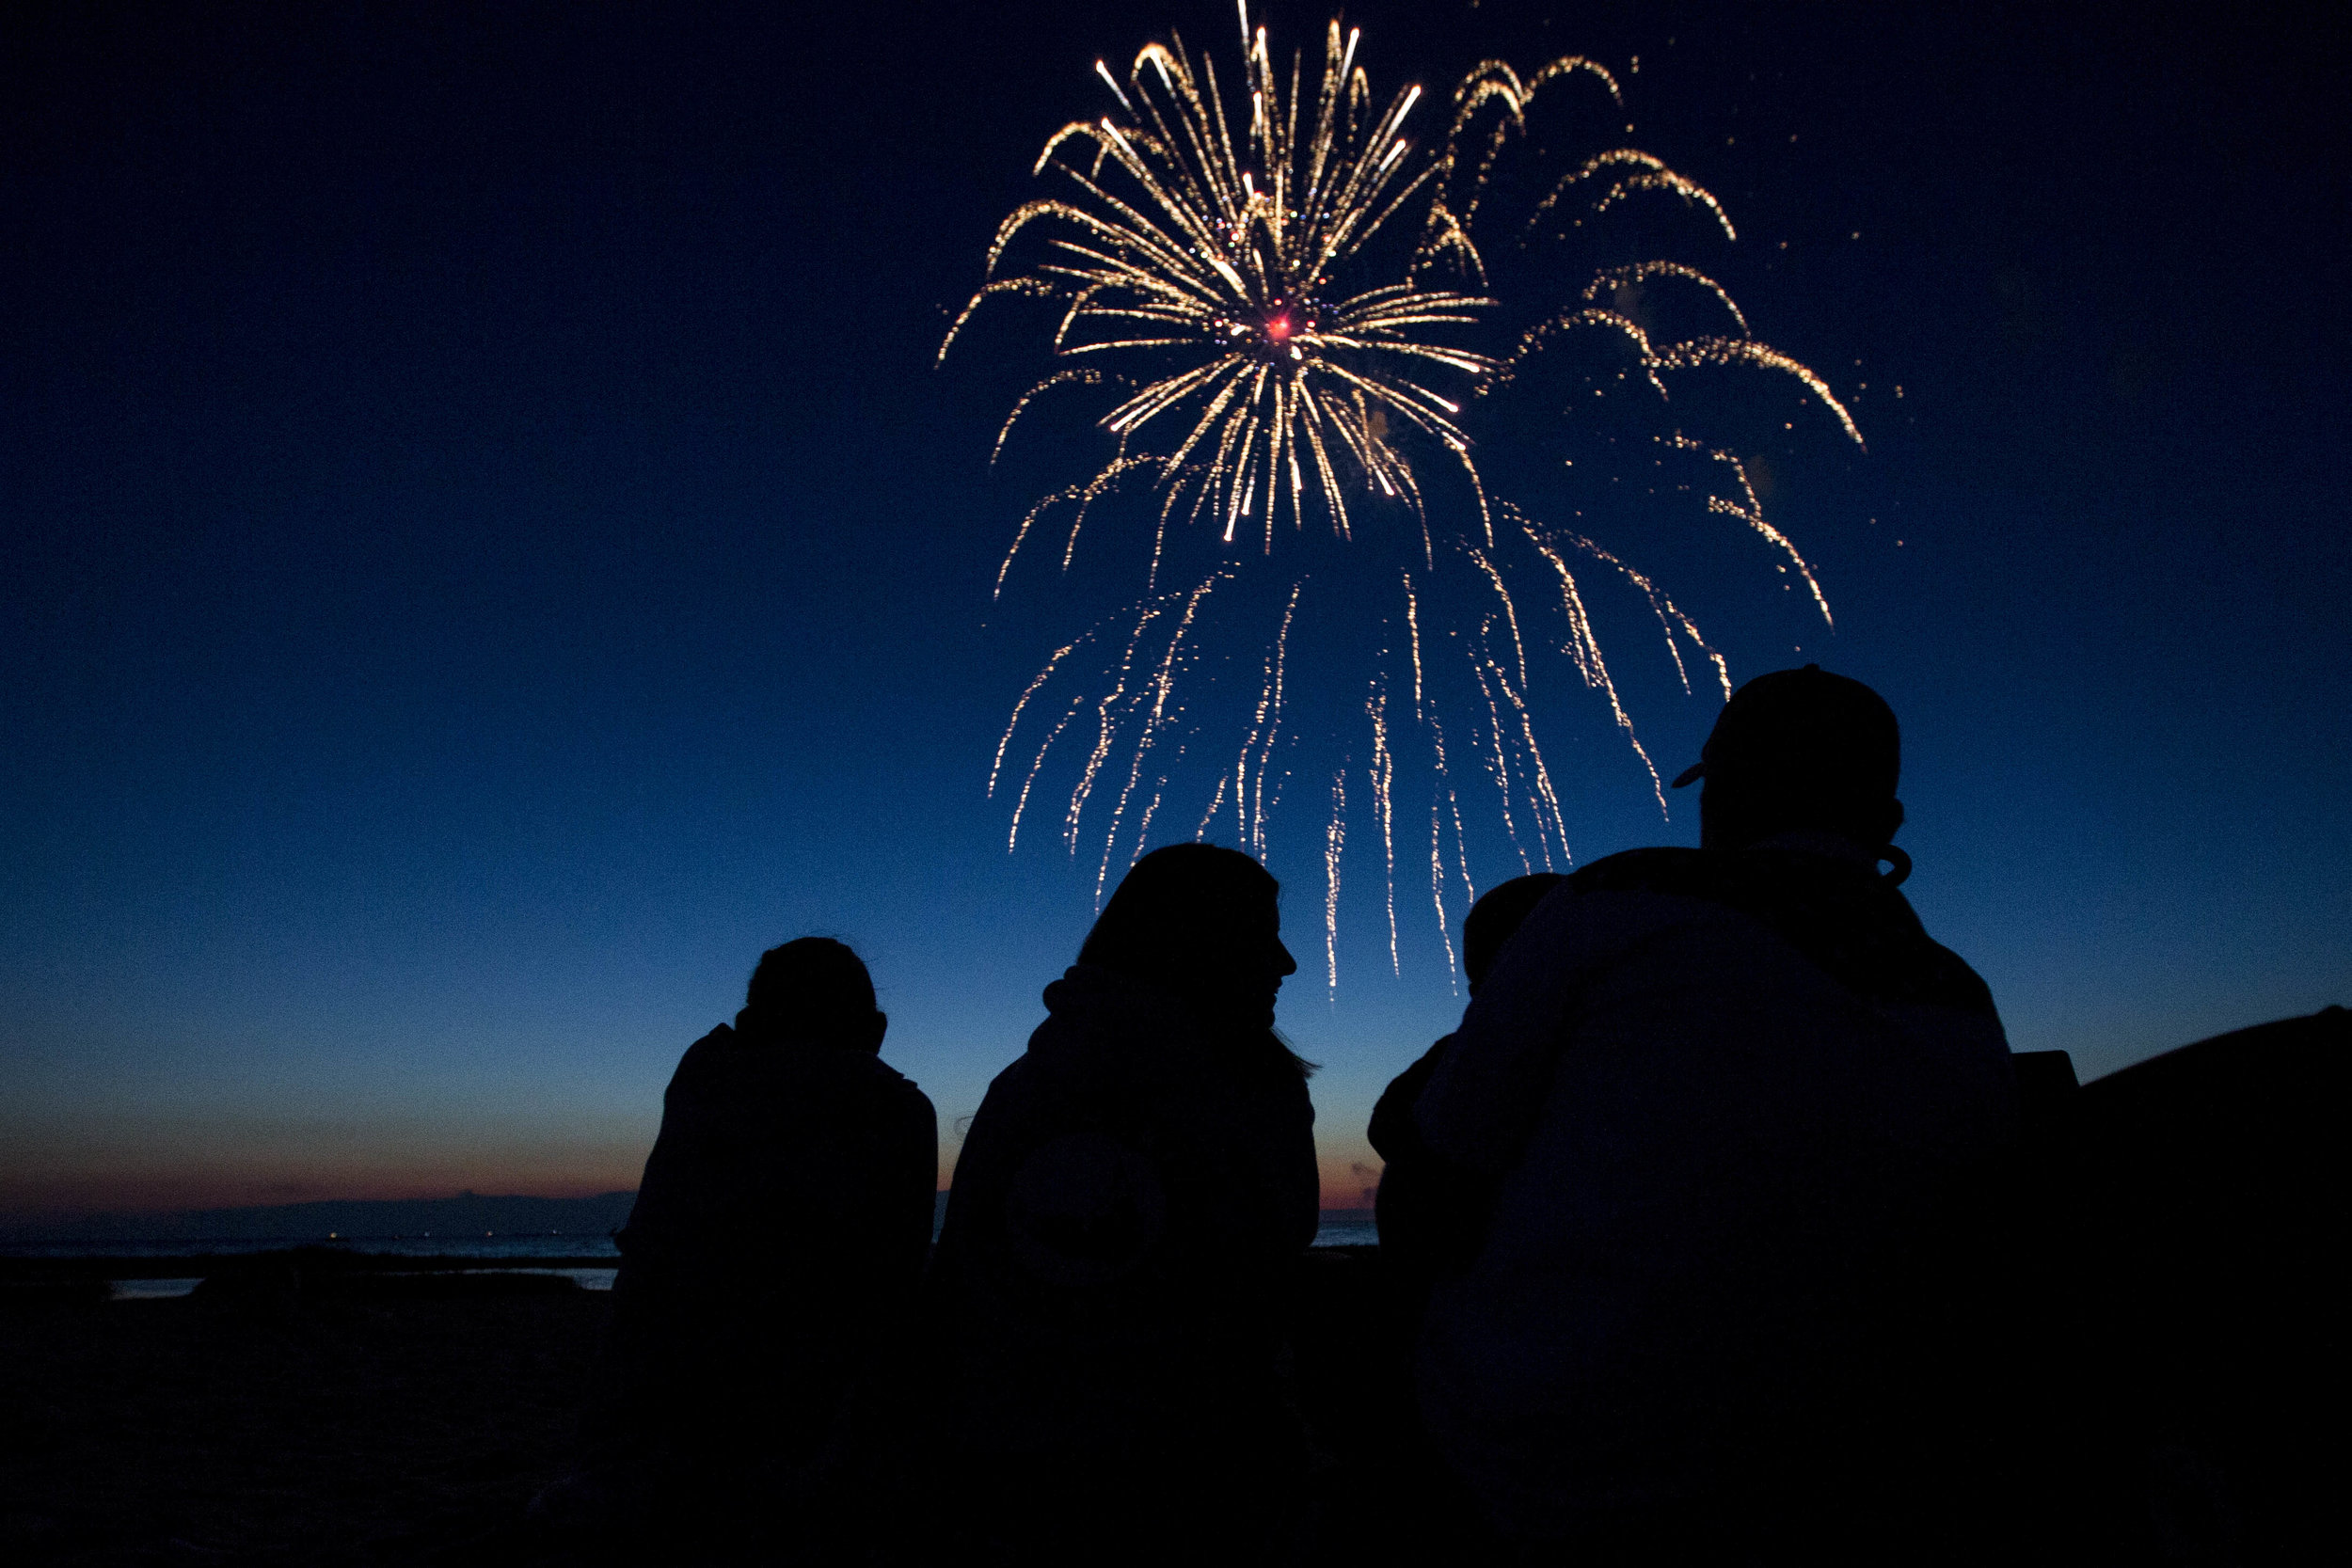  The Lulley family watches the fireworks on the shore of Rock Harbor in Orleans, Massachusetts on July 2, 2017. 